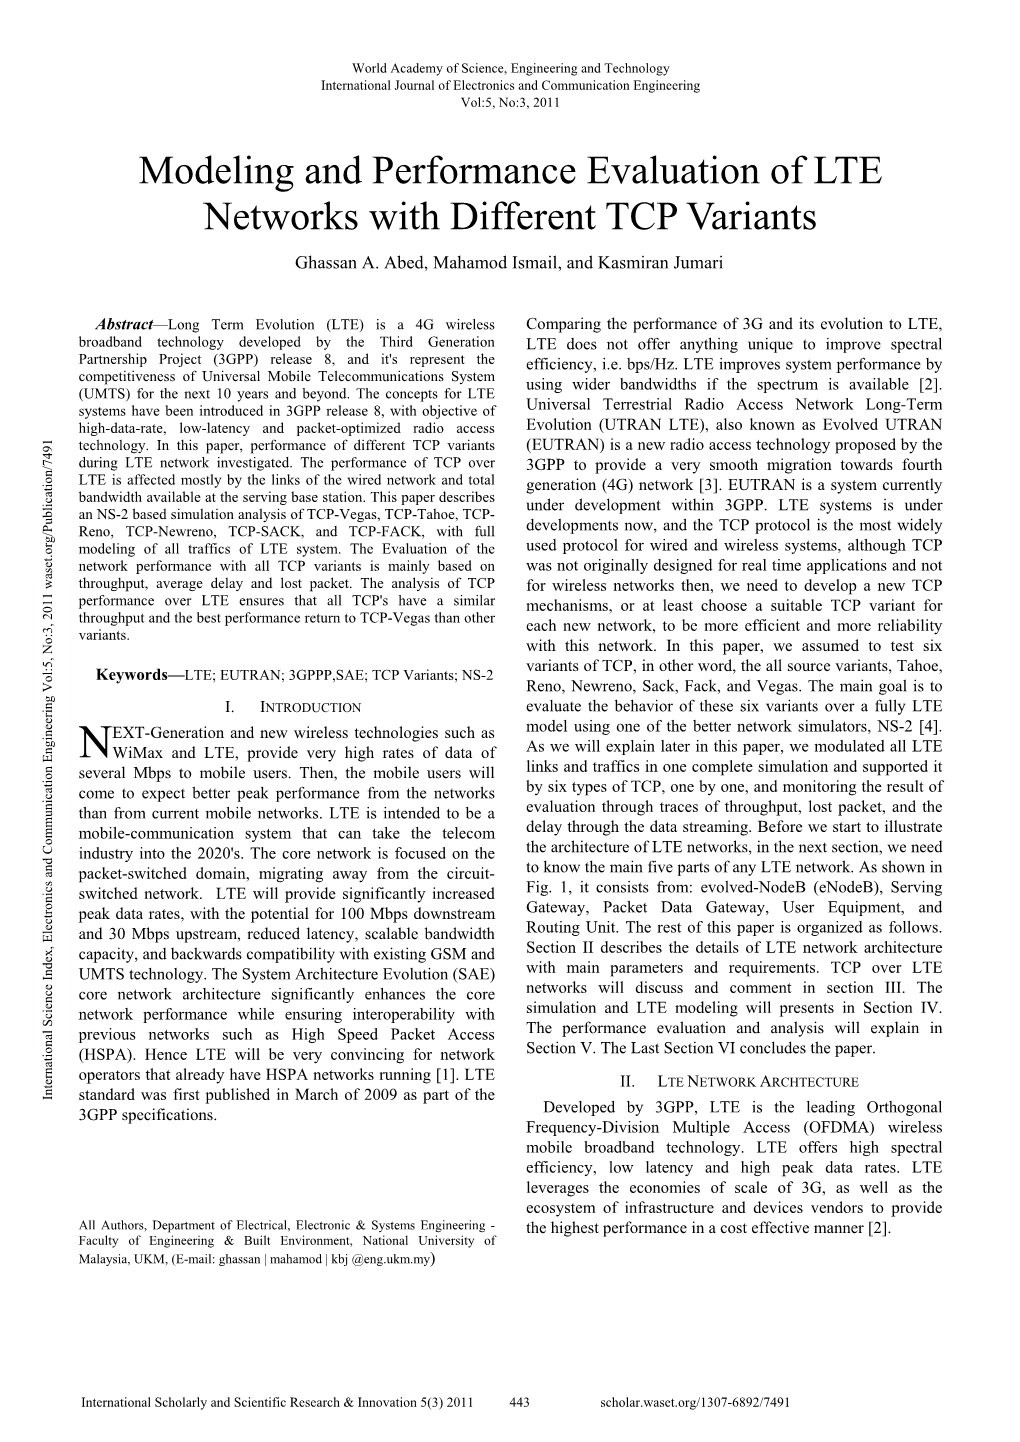 Modeling and Performance Evaluation of LTE Networks with Different TCP Variants Ghassan A